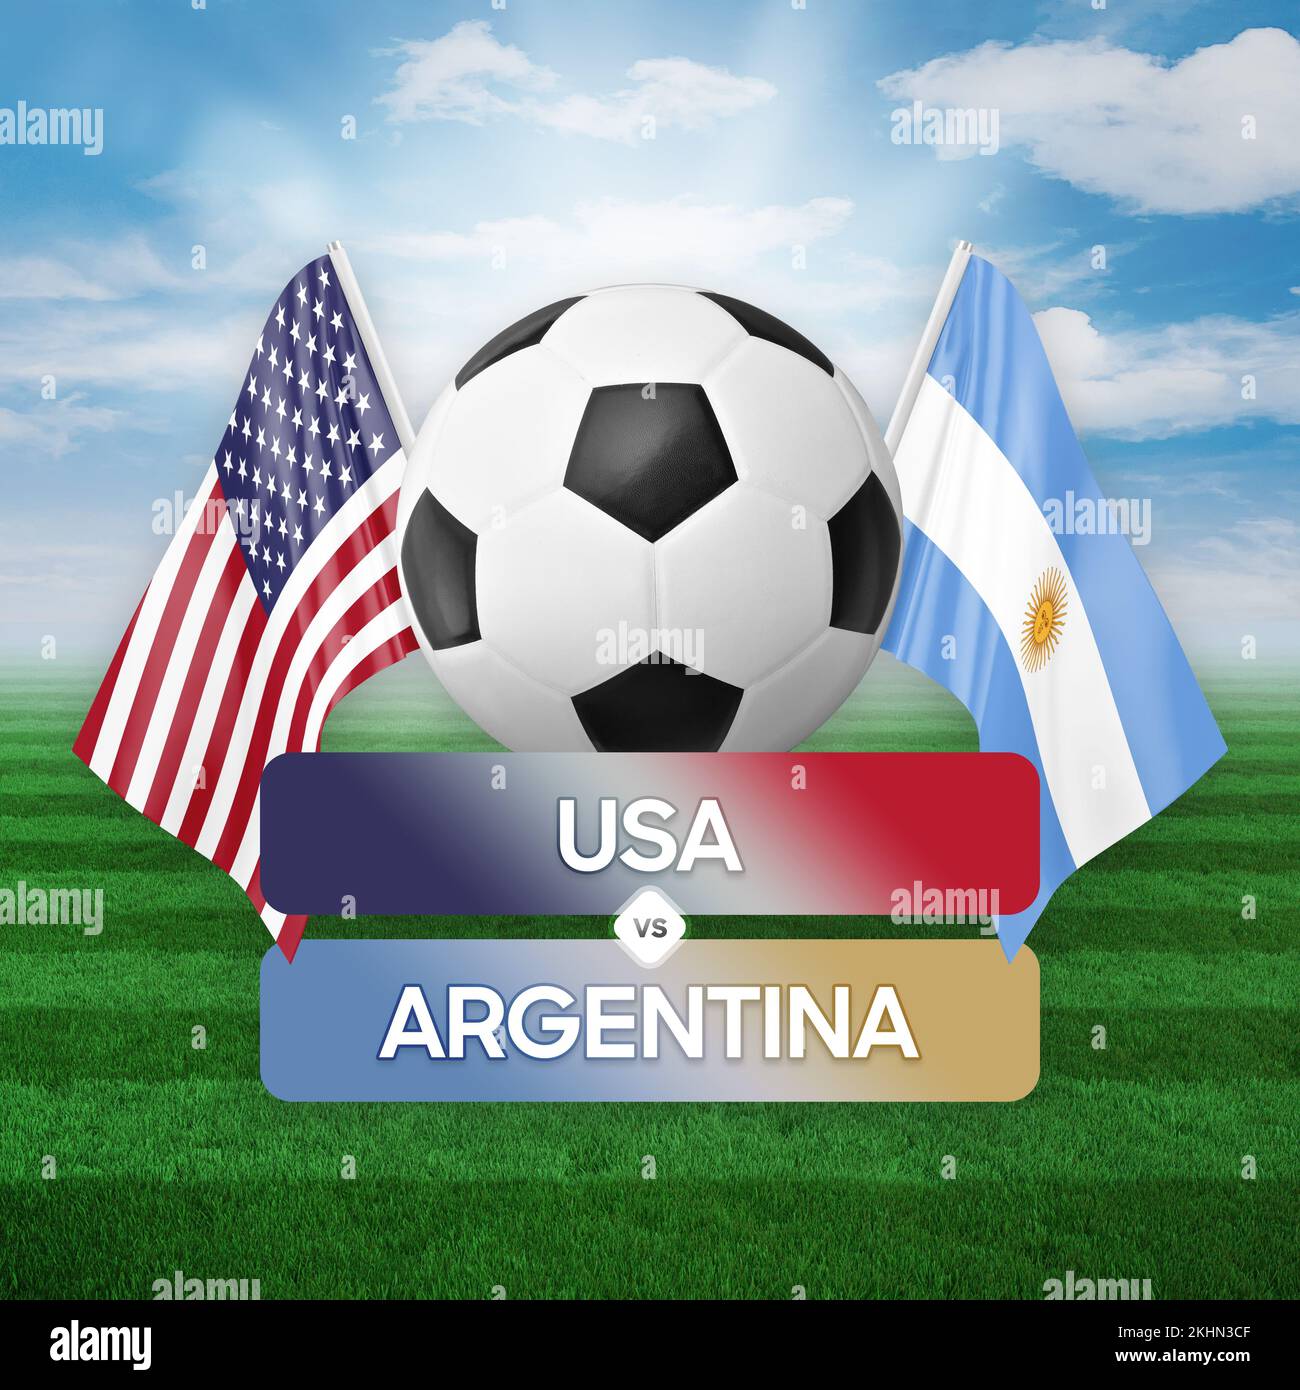 USA vs Argentina national teams soccer football match competition